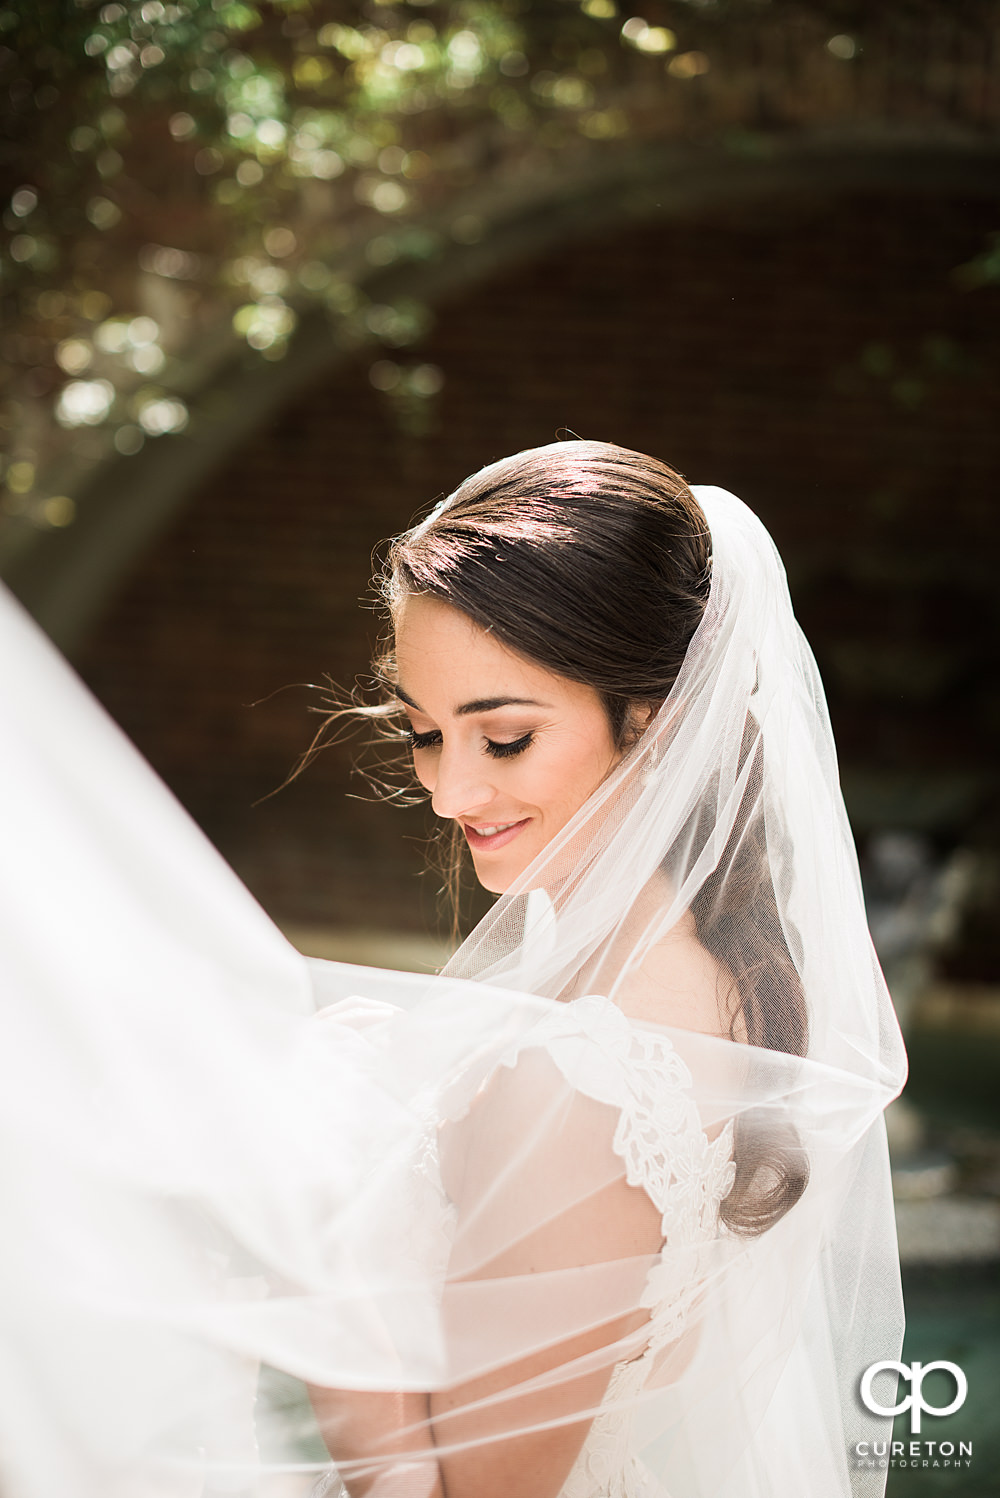 Bride smiling with her veil blowing in the rose garden at Furman.